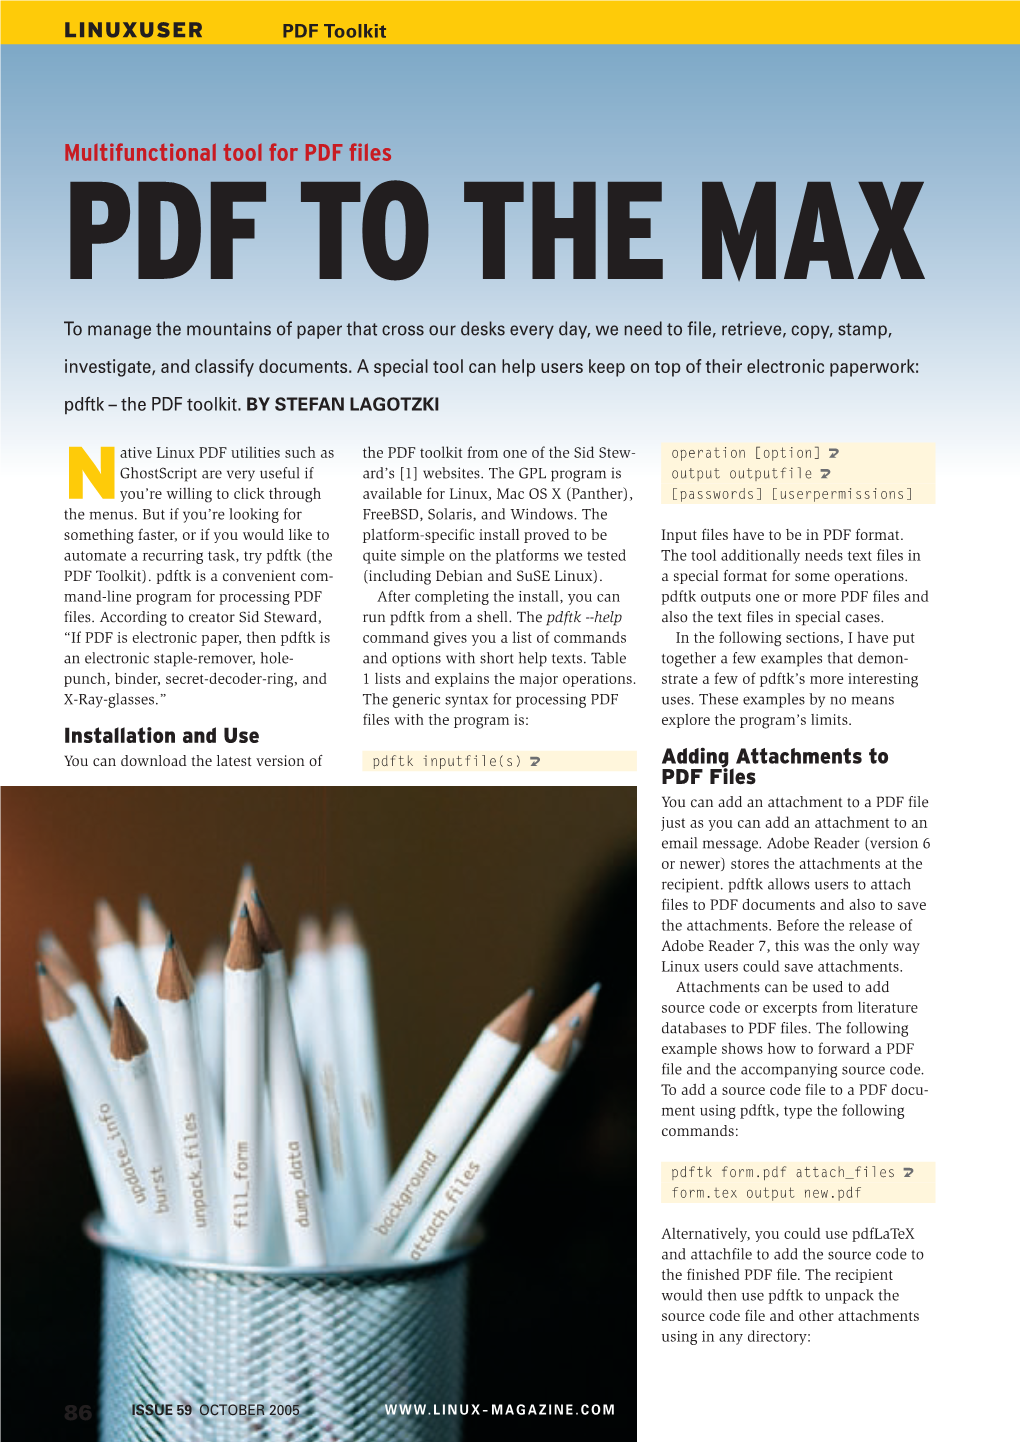 Multifunctional Tool for PDF Files